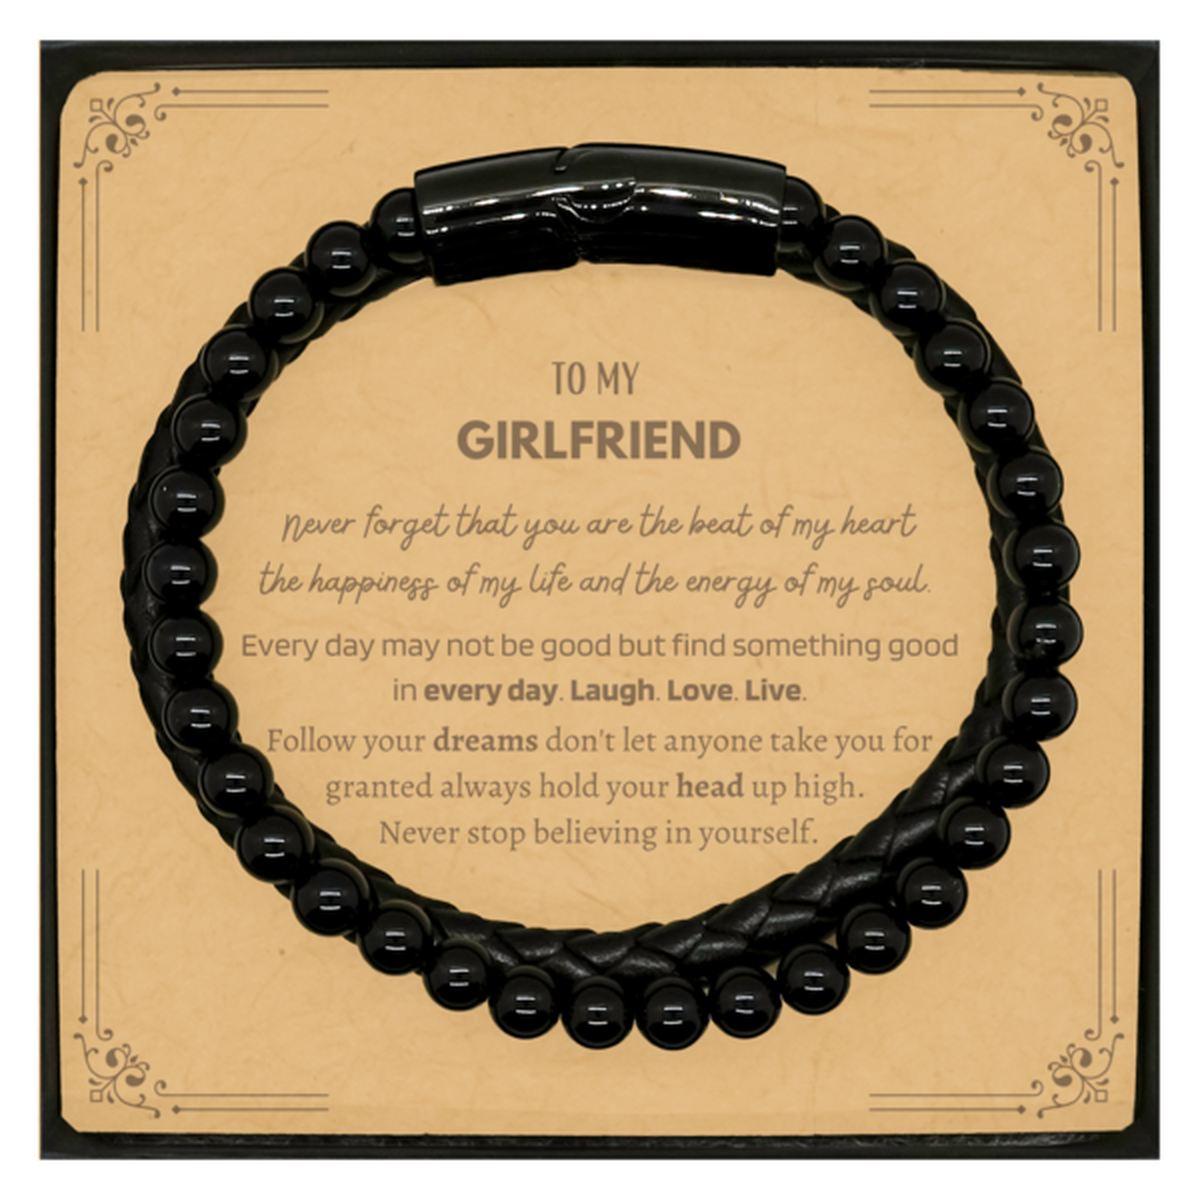 To My Girlfriend Message Card Gifts, Christmas Girlfriend Stone Leather Bracelets Present, Birthday Unique Motivational For Girlfriend, To My Girlfriend Never forget that you are the beat of my heart the happiness of my life and the energy of my soul